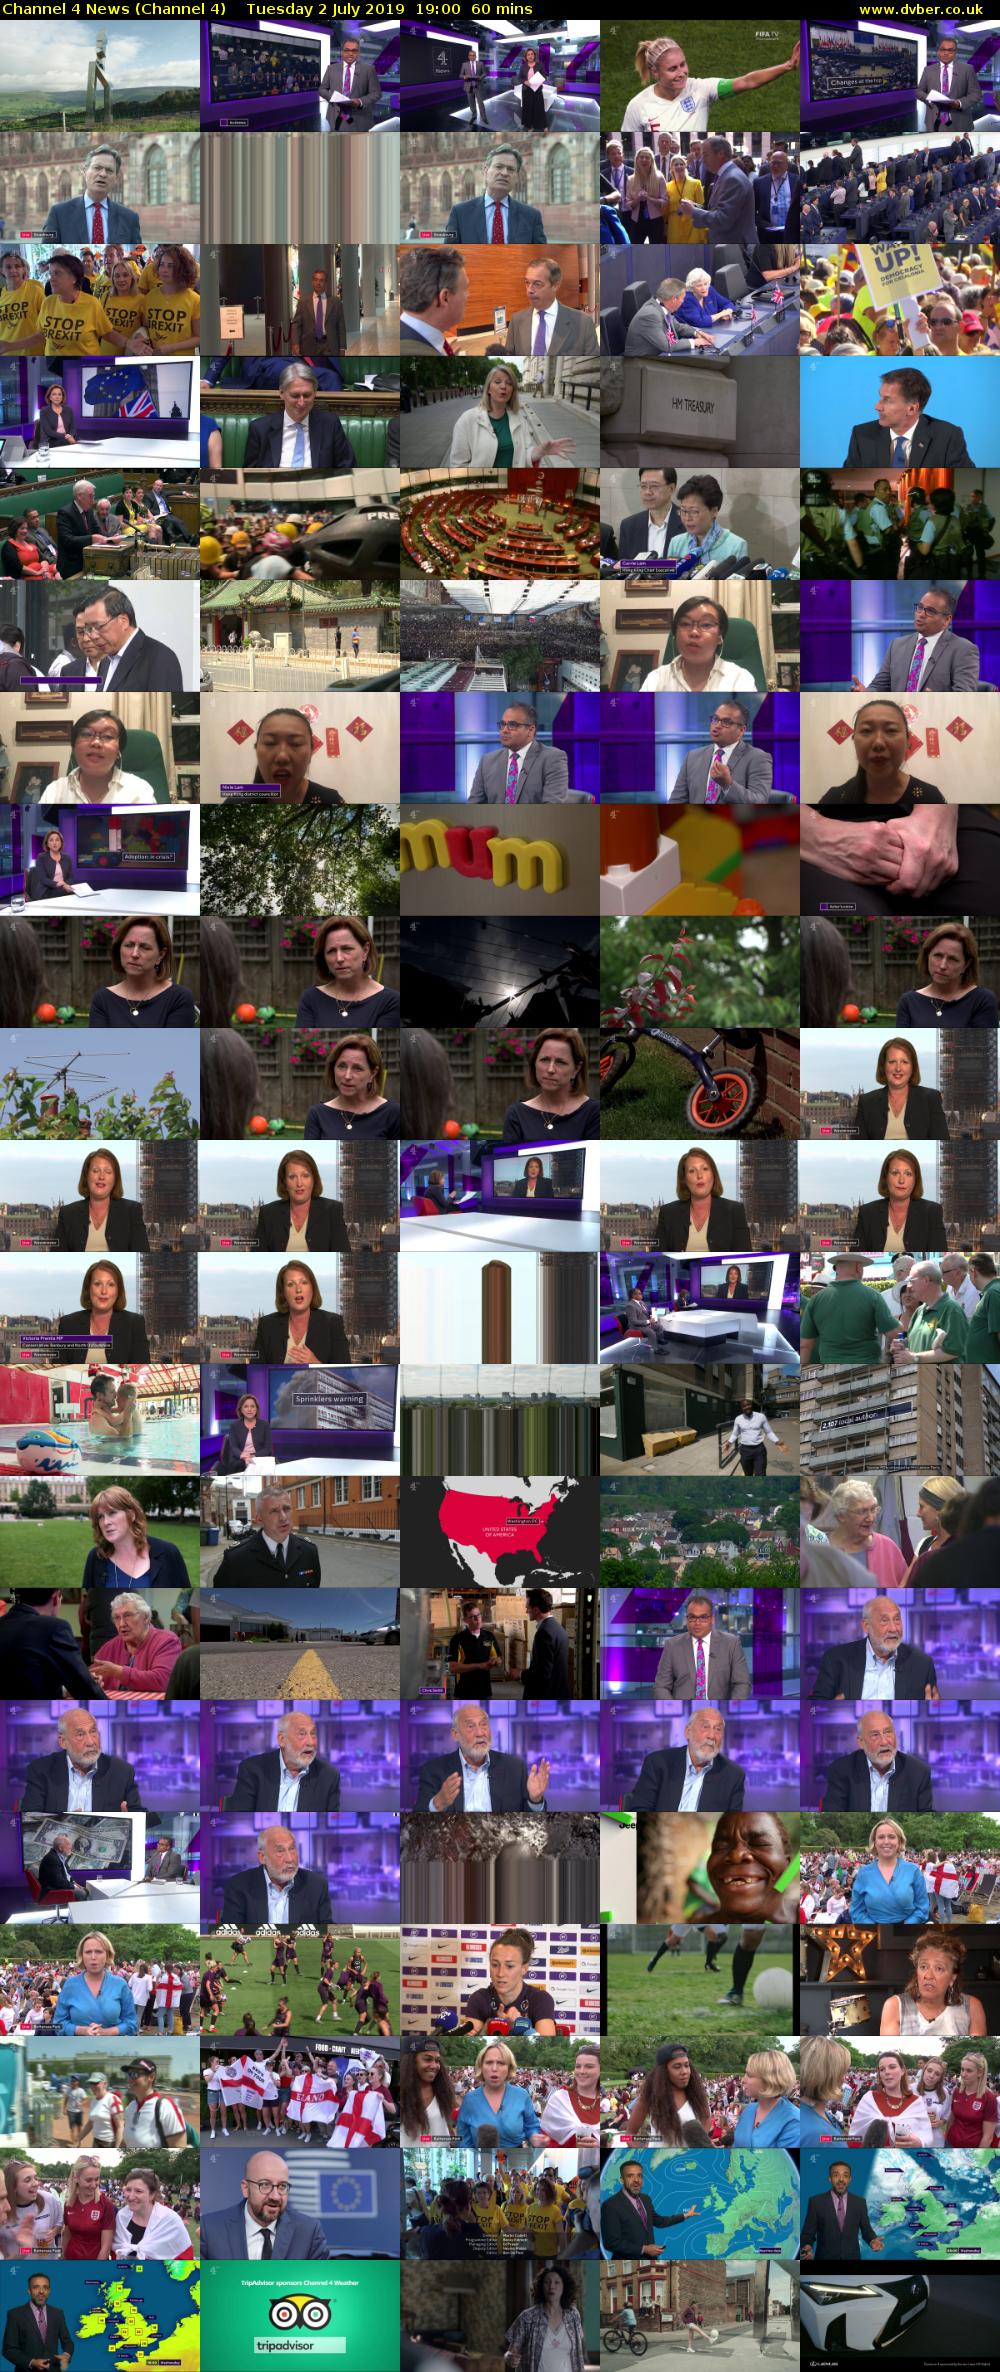 Channel 4 News (Channel 4) Tuesday 2 July 2019 19:00 - 20:00